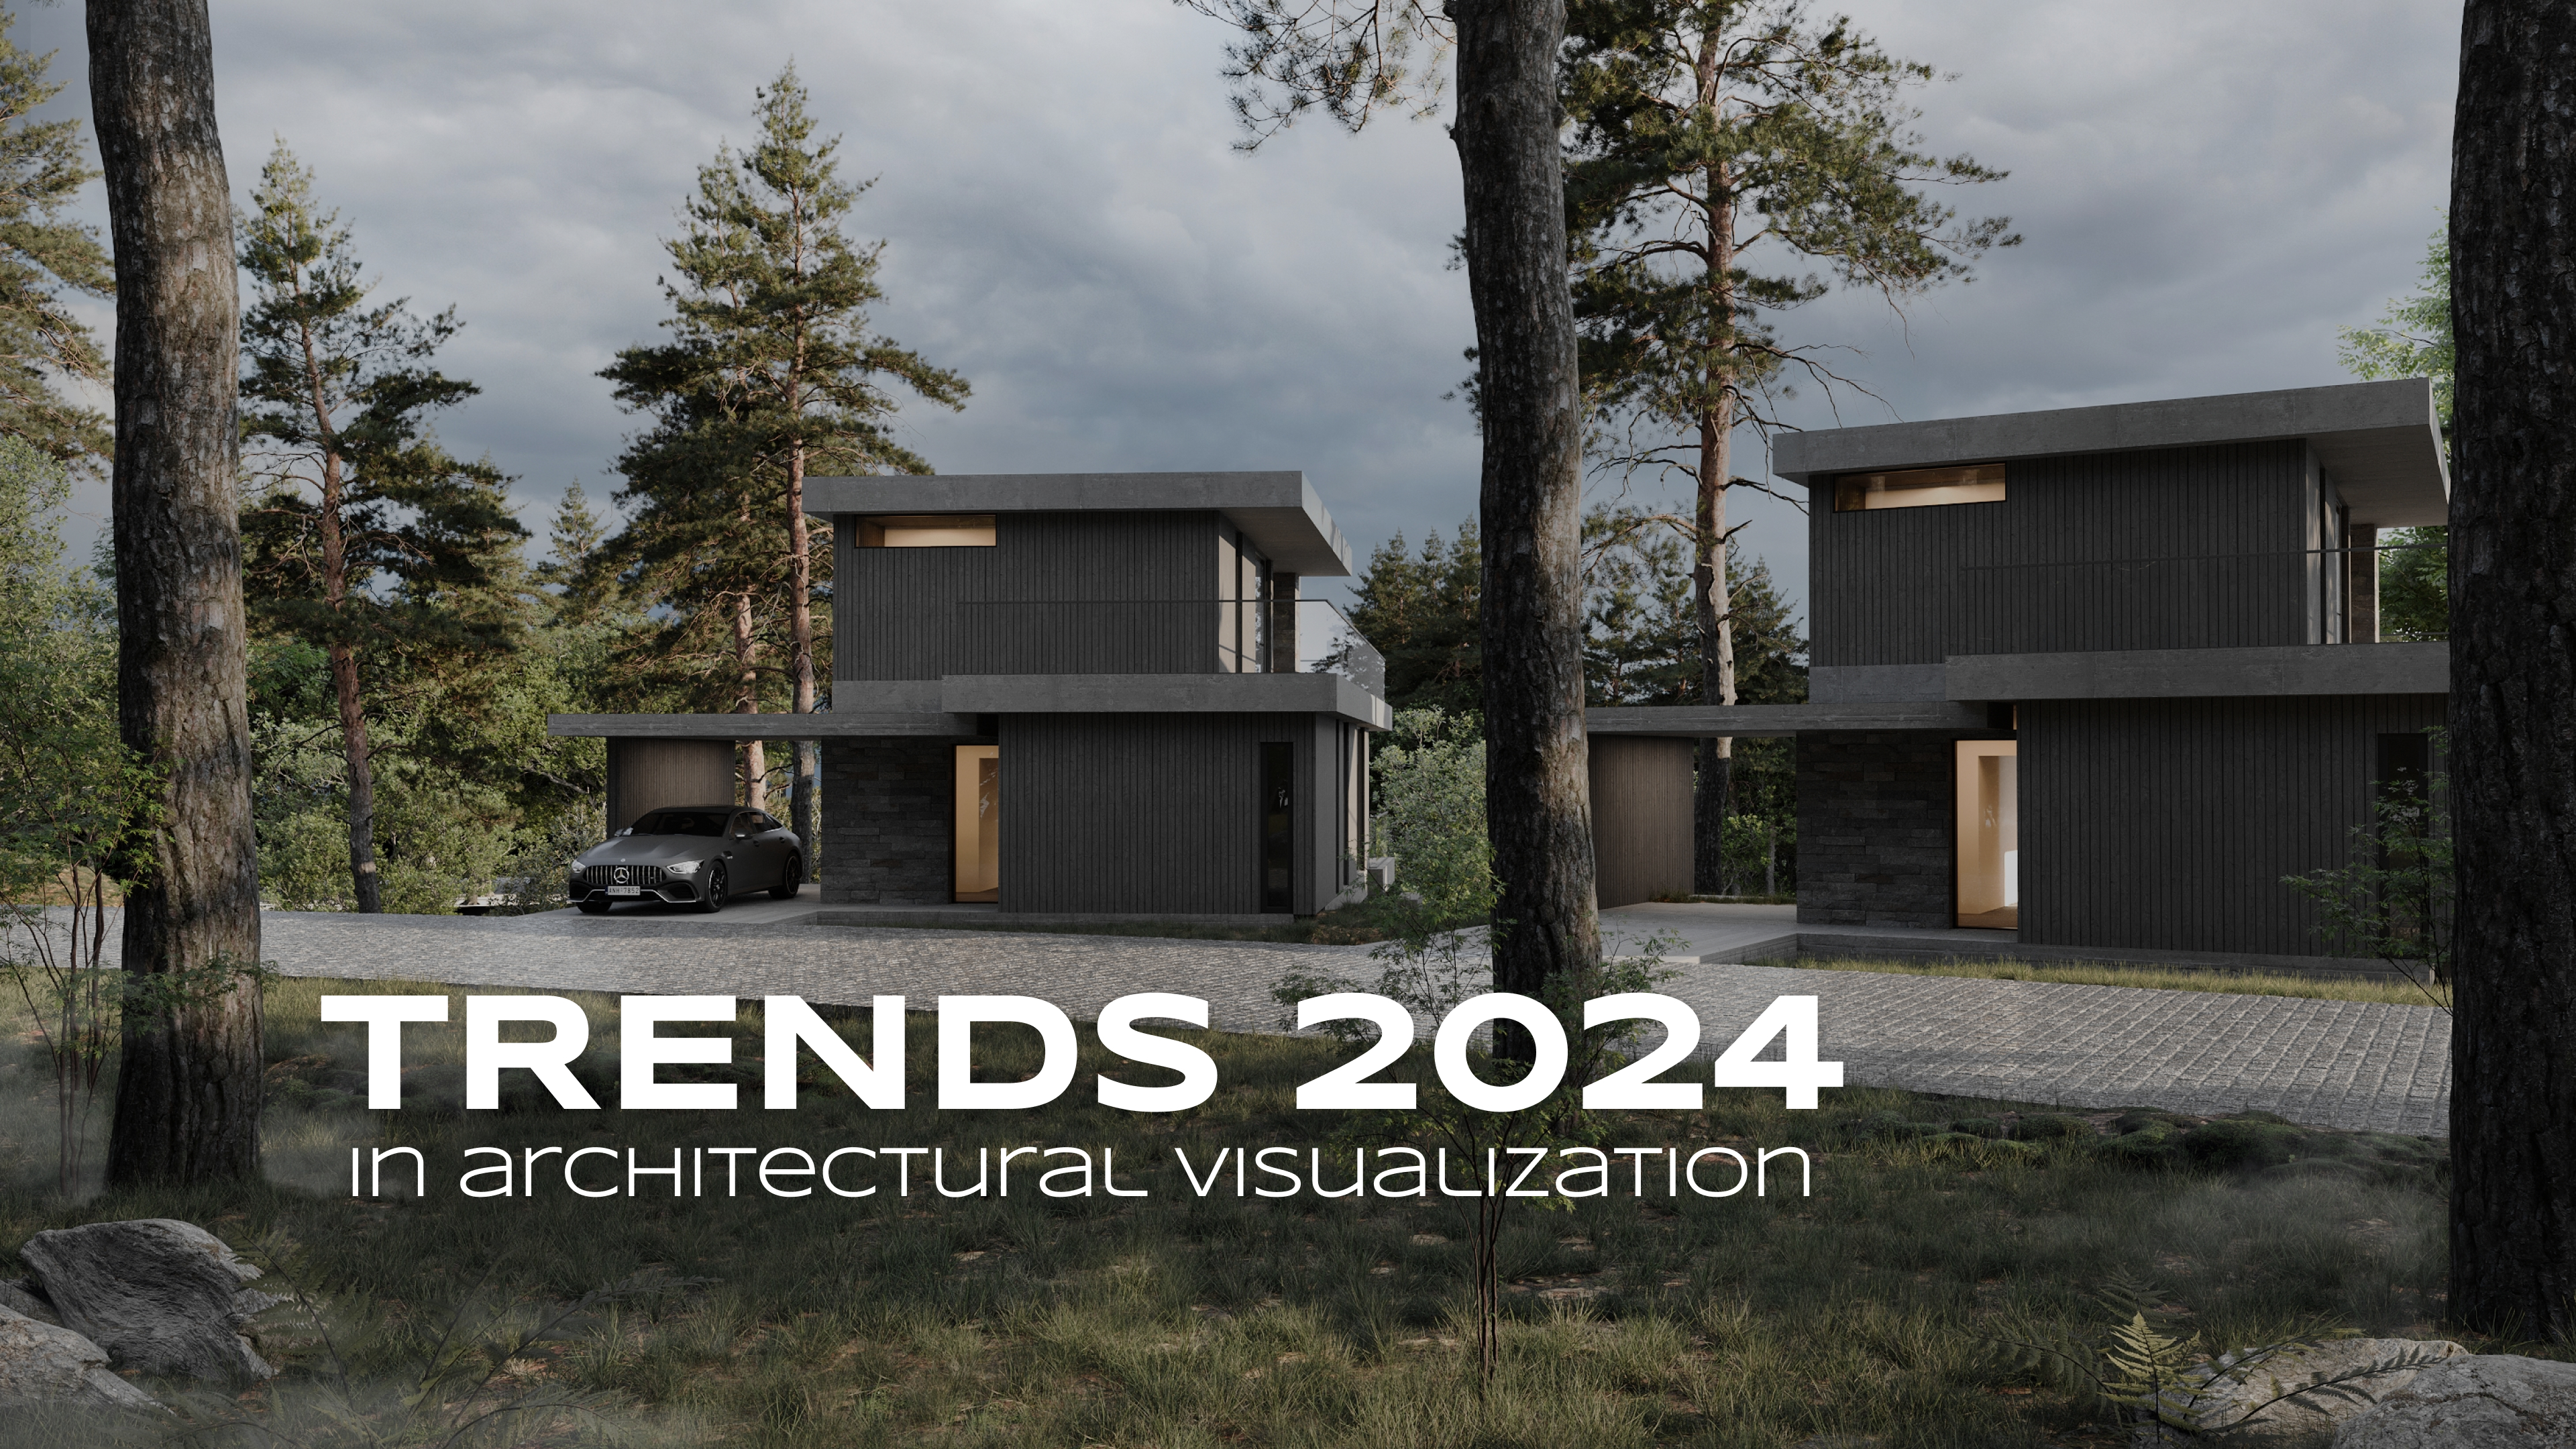 Architectural visualization trends in 2024